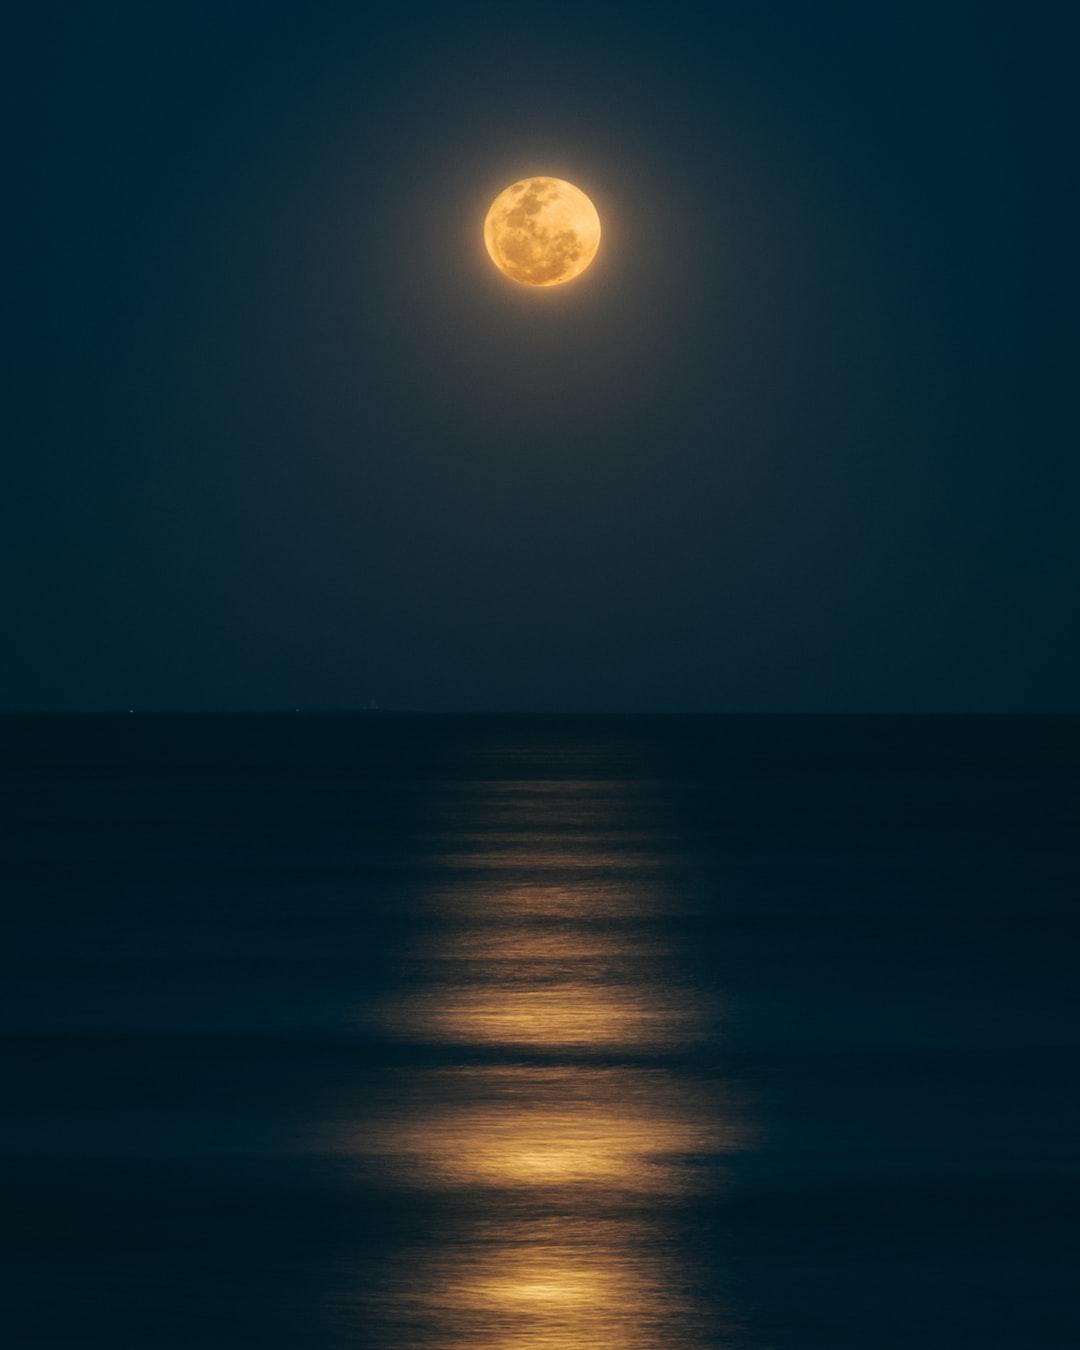 Moonlight Picture. Download Free Image